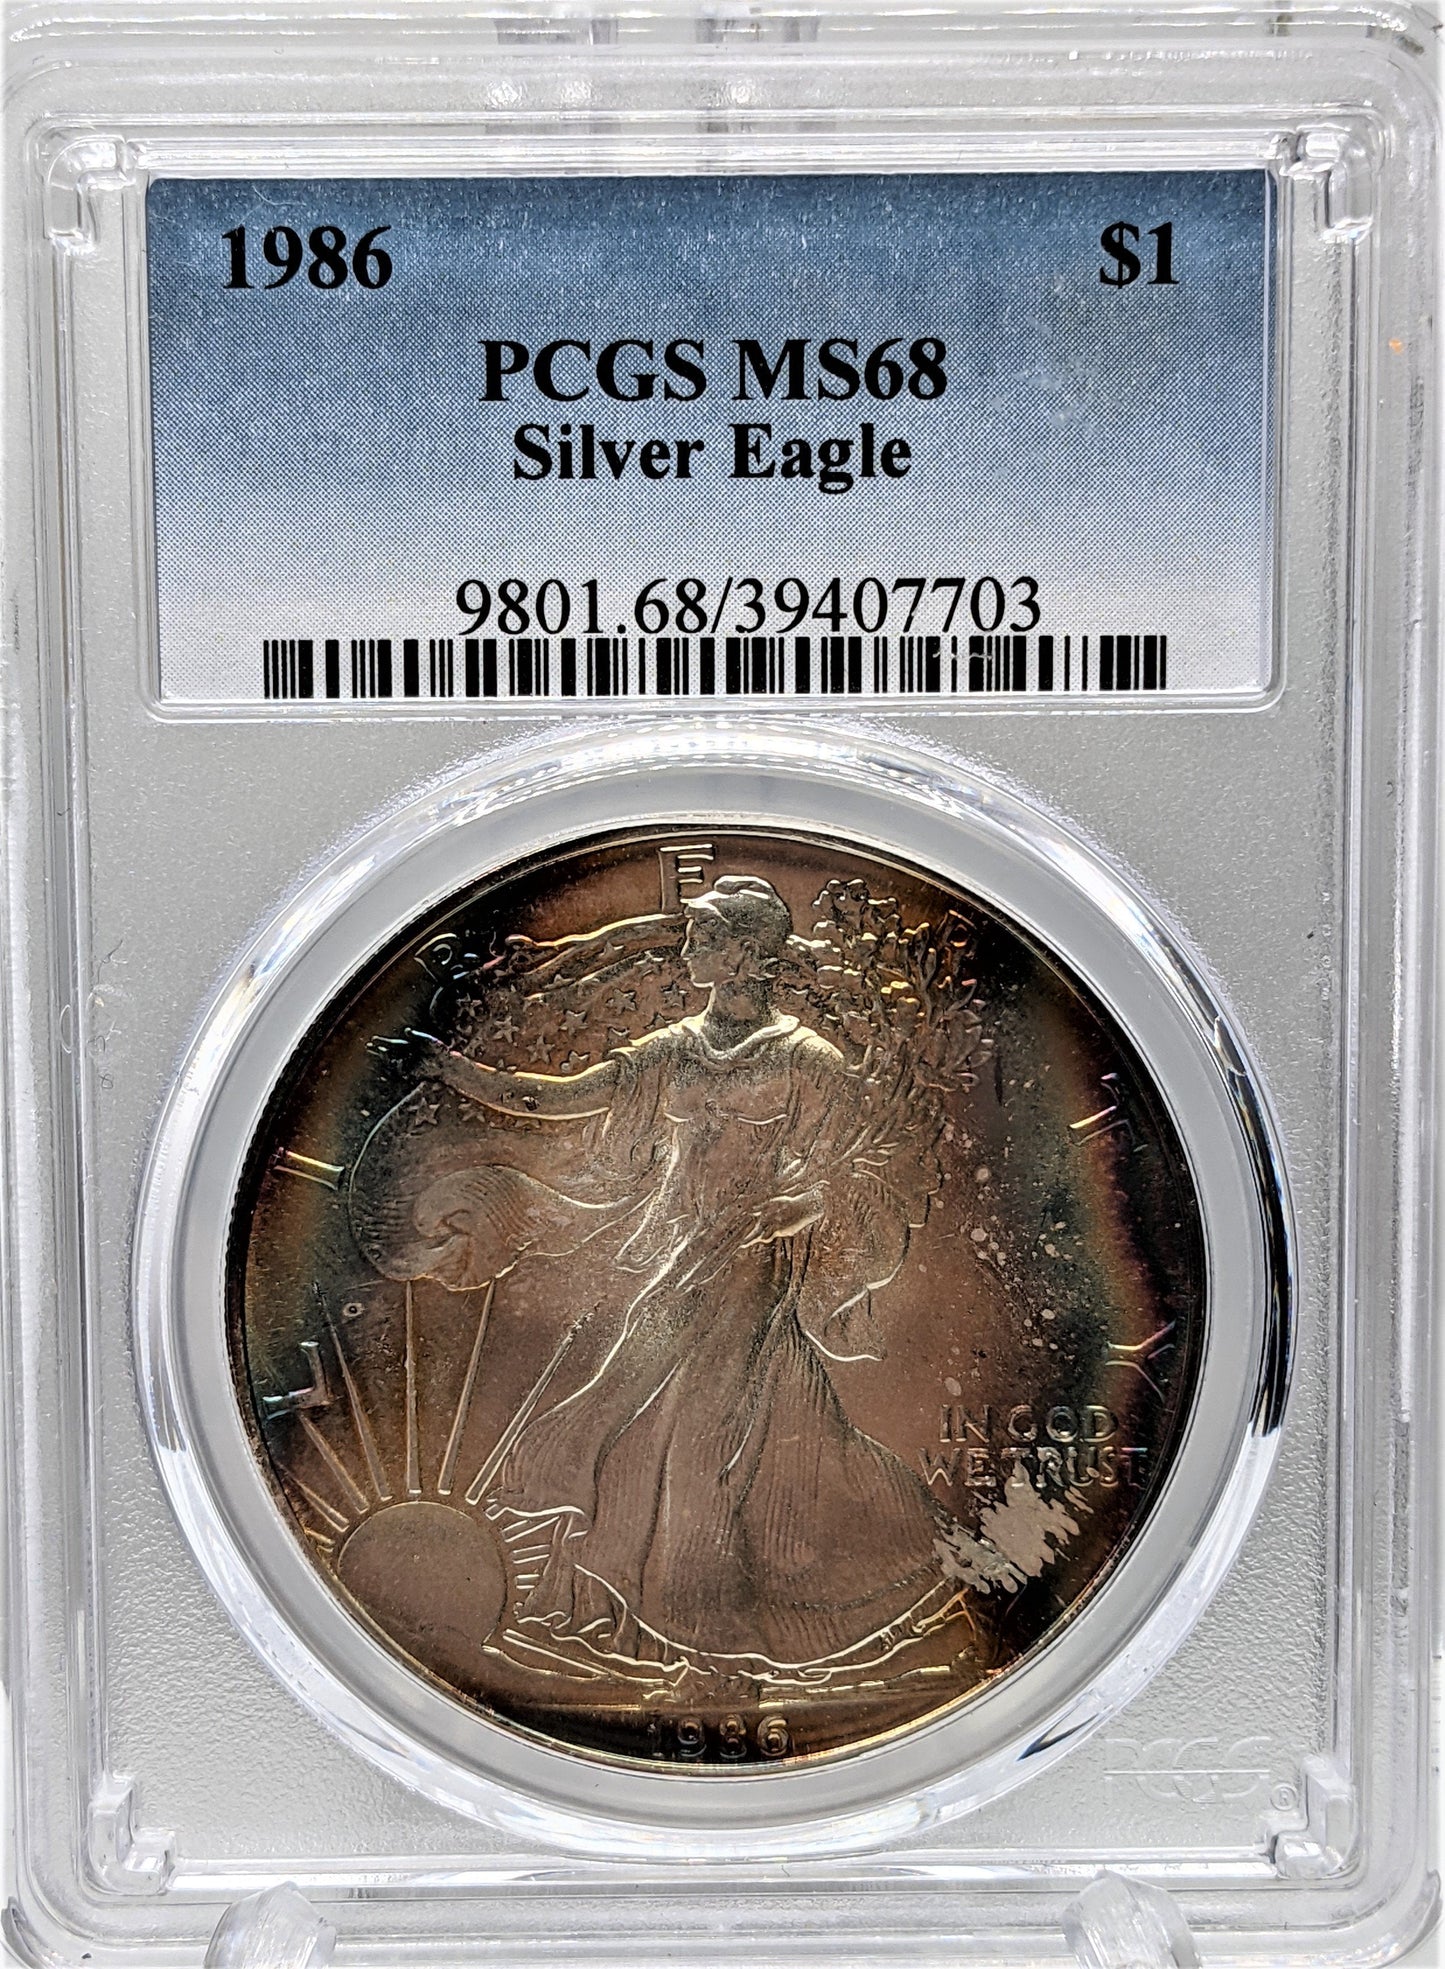 1986 Silver Eagle -Toning - PCGS MS68